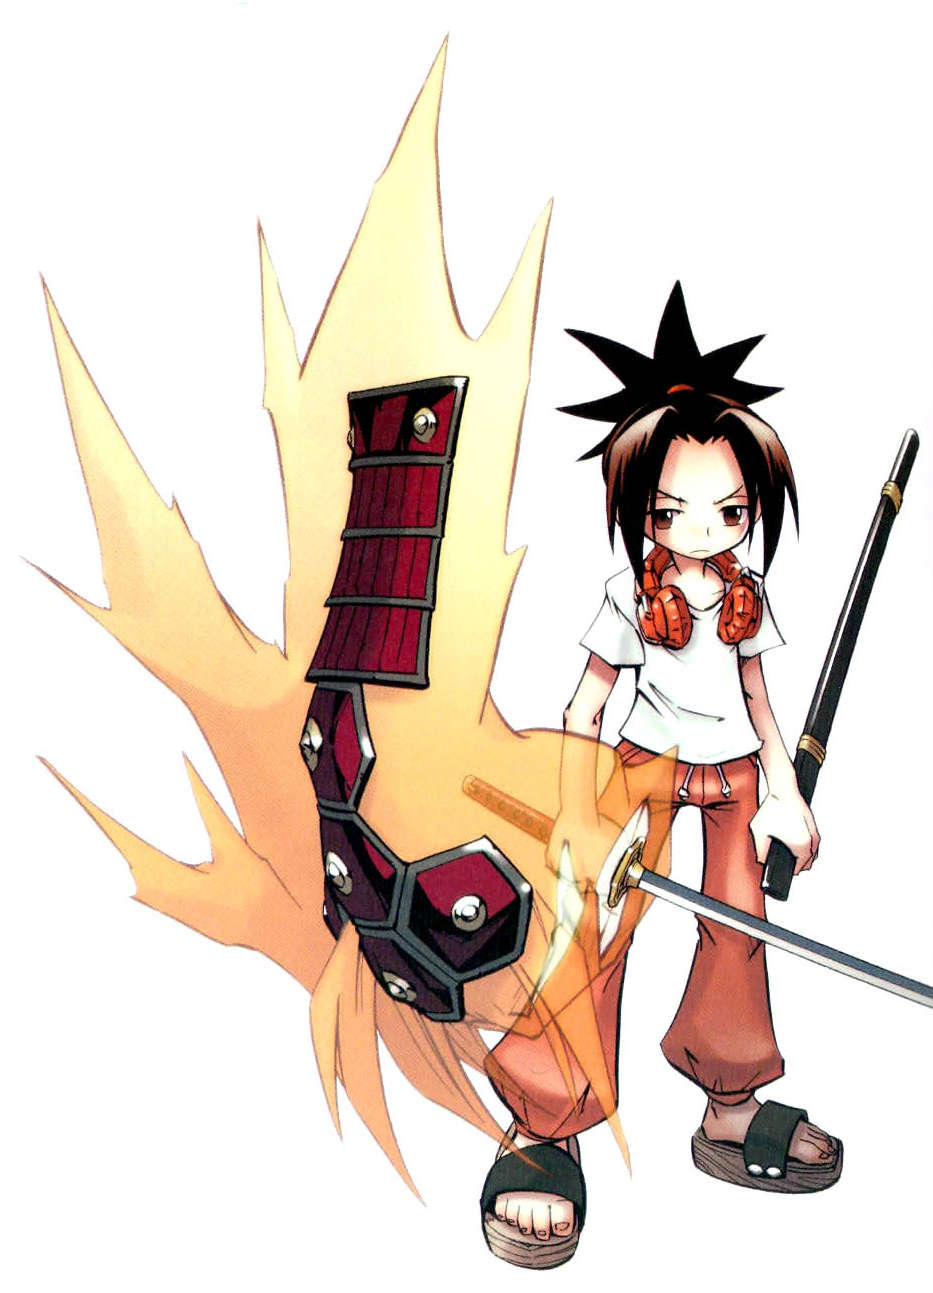 Everything will work out for Yoh Asakura in DB! by vh1660924 on DeviantArt